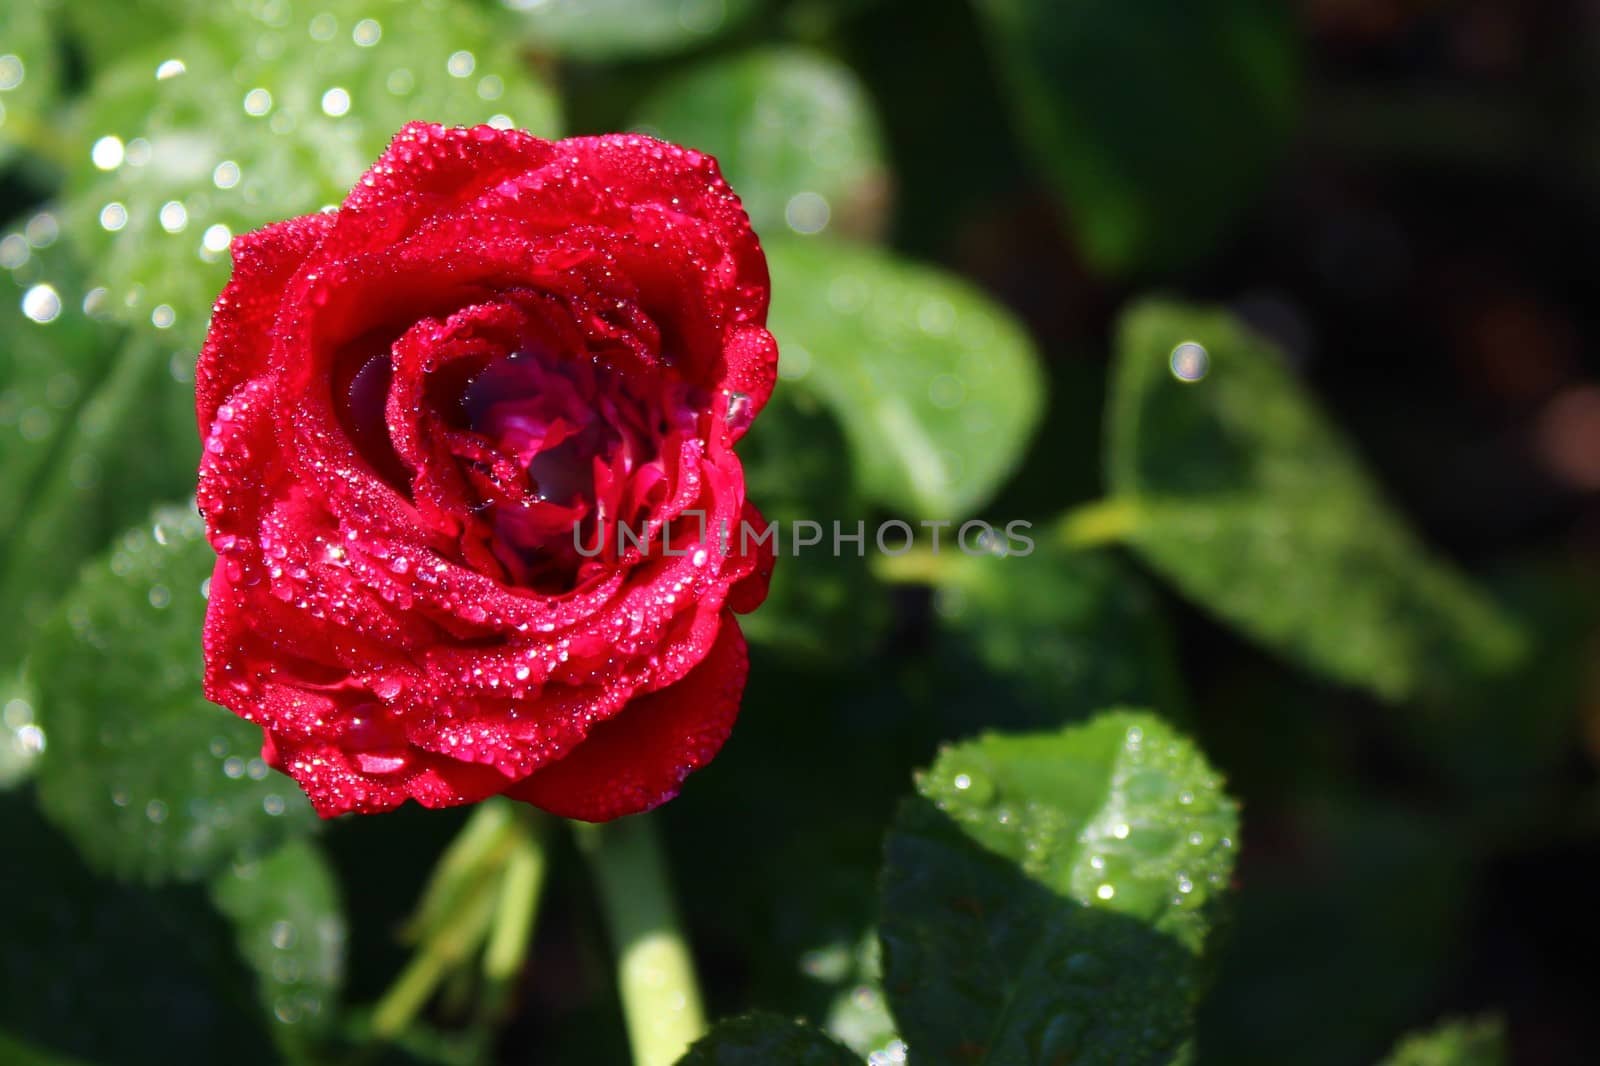 The picture shows red roses after the rain.